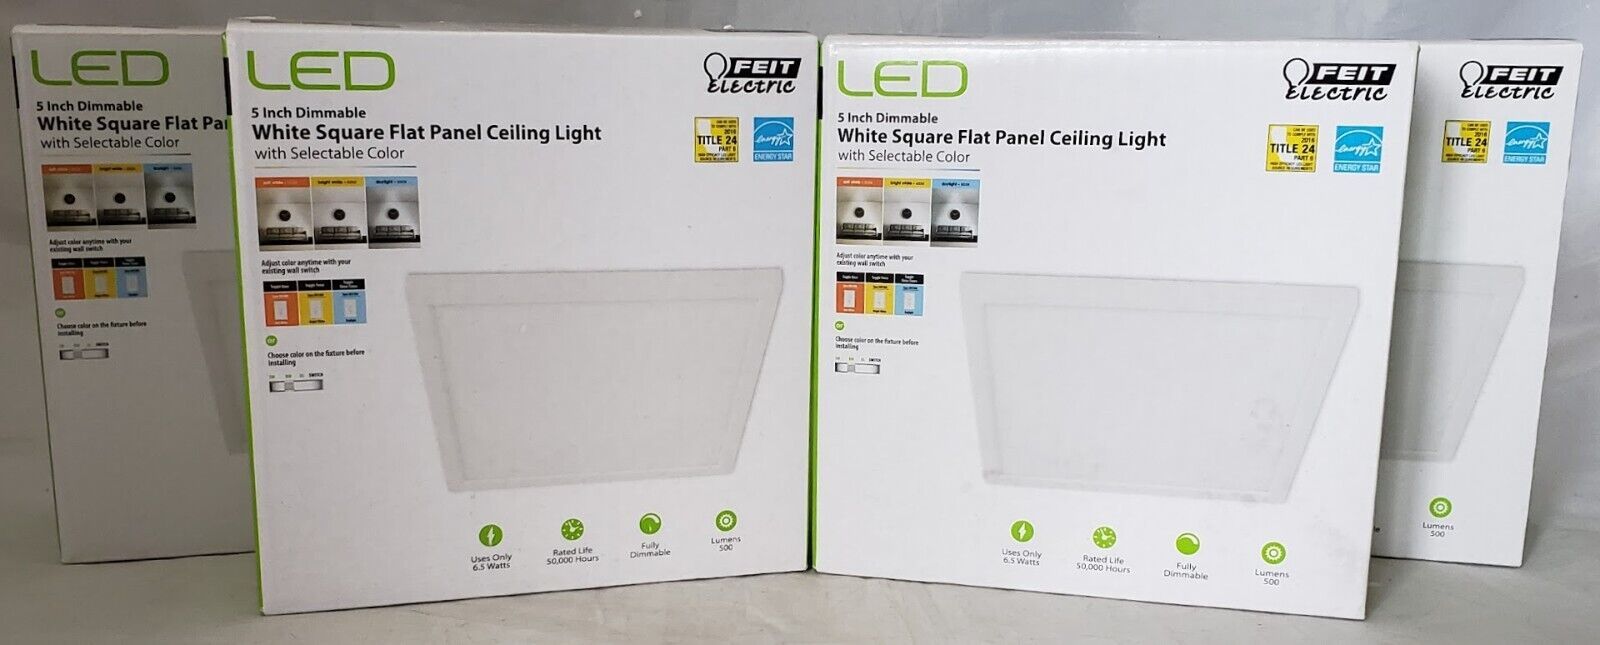 Feit  5" 8W Title 24 Dimmable White LED Sq. Flat Panel Ceiling Light 4 pack - $59.37